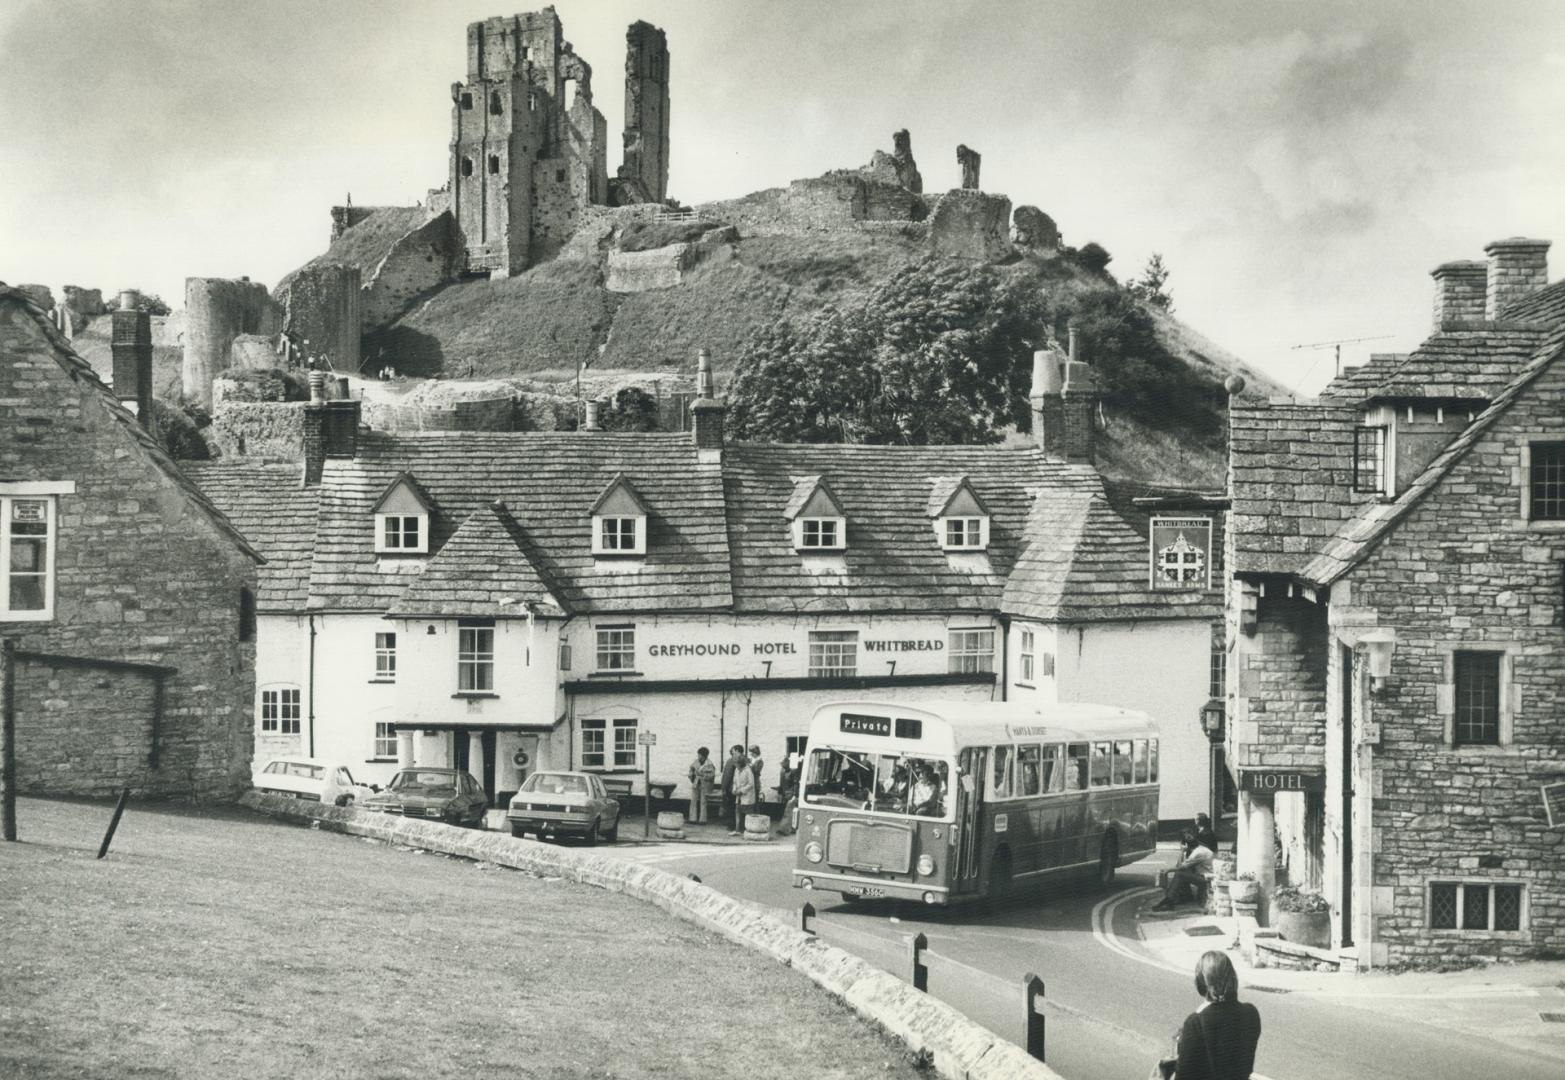 Village of Corfe in South of England near Poole